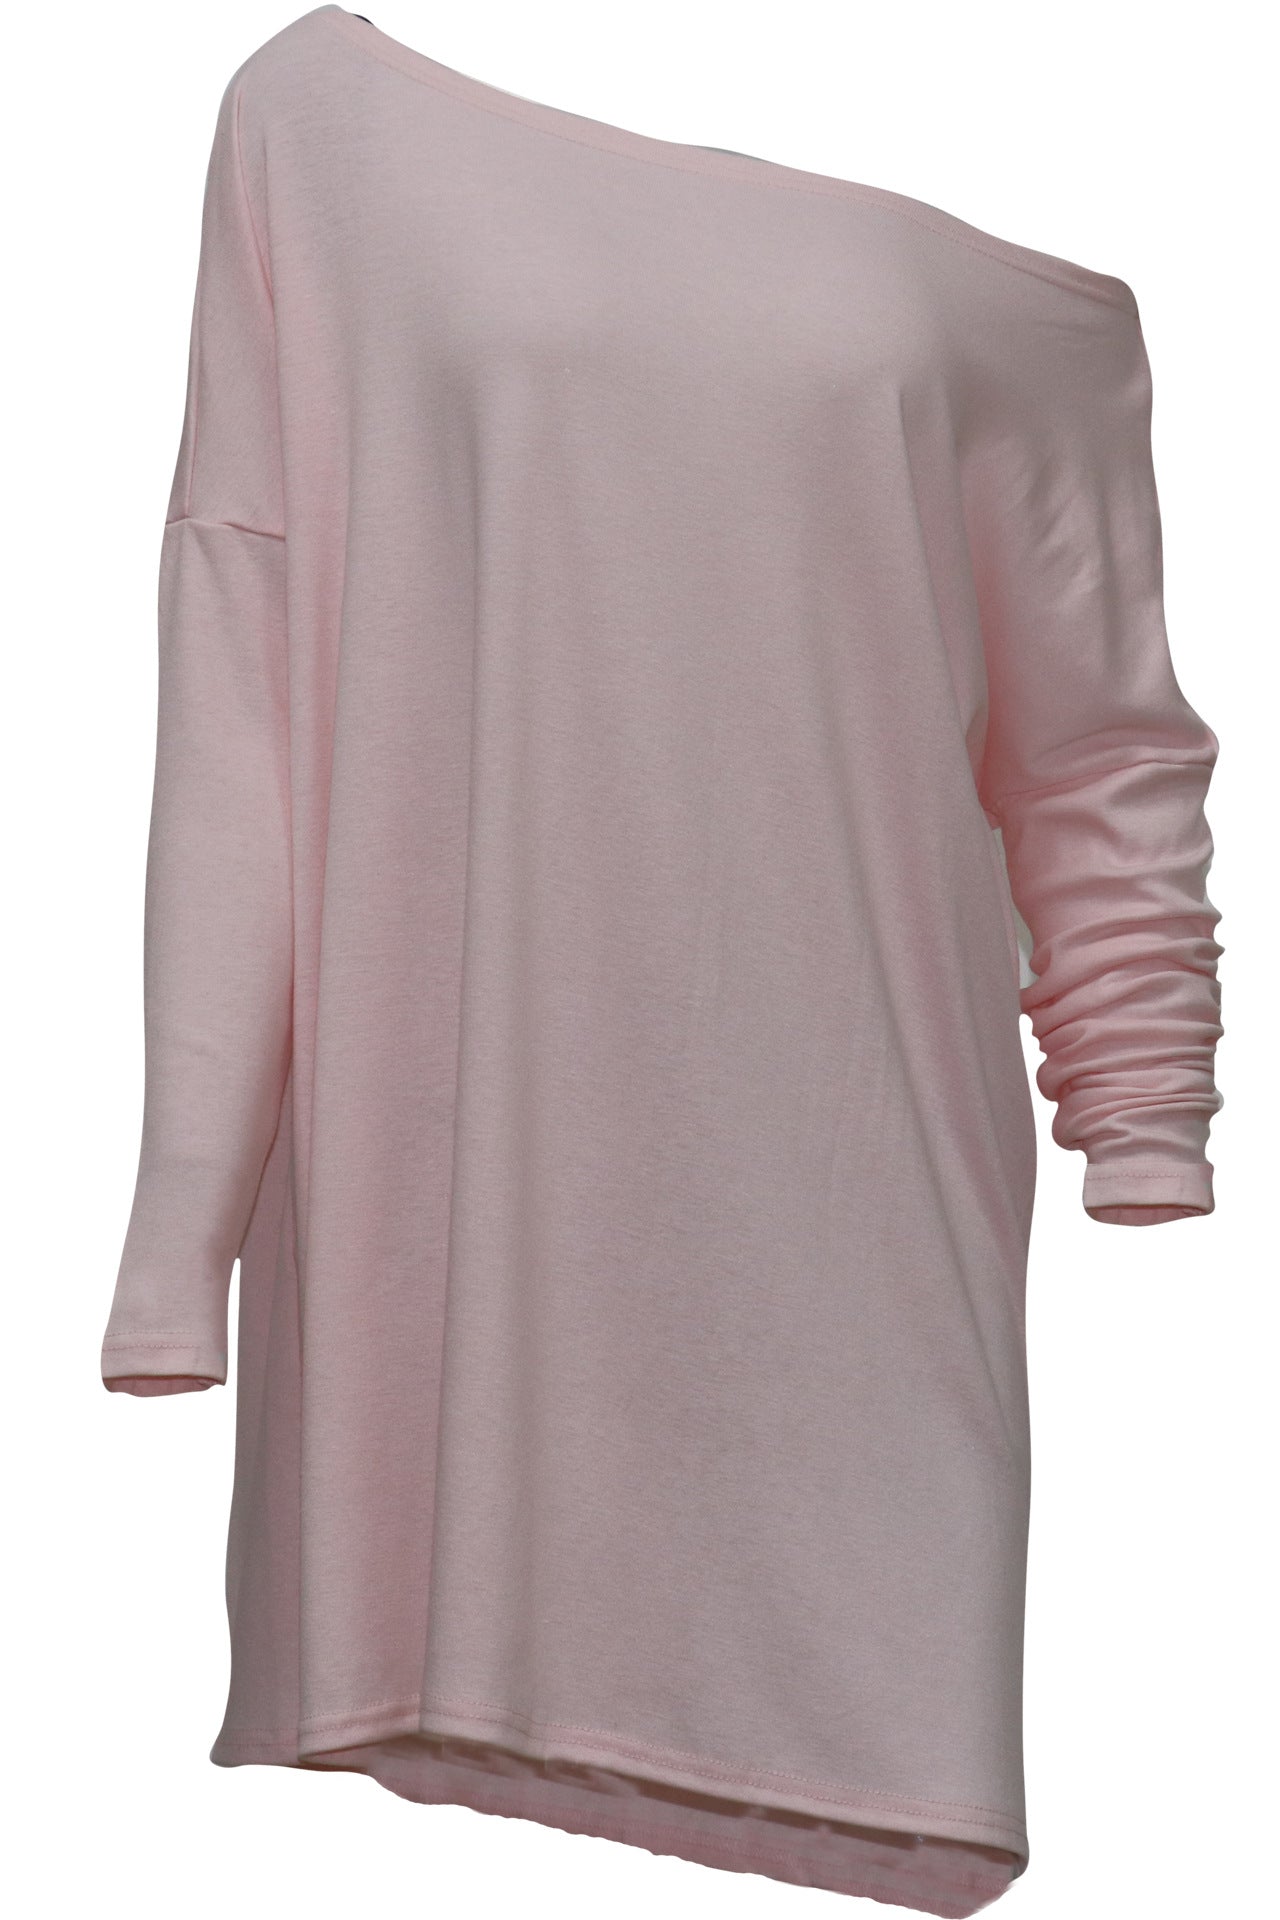 Fashion Off The Shoulder Long Sleeves T Shirts-Pink-S-Free Shipping at meselling99